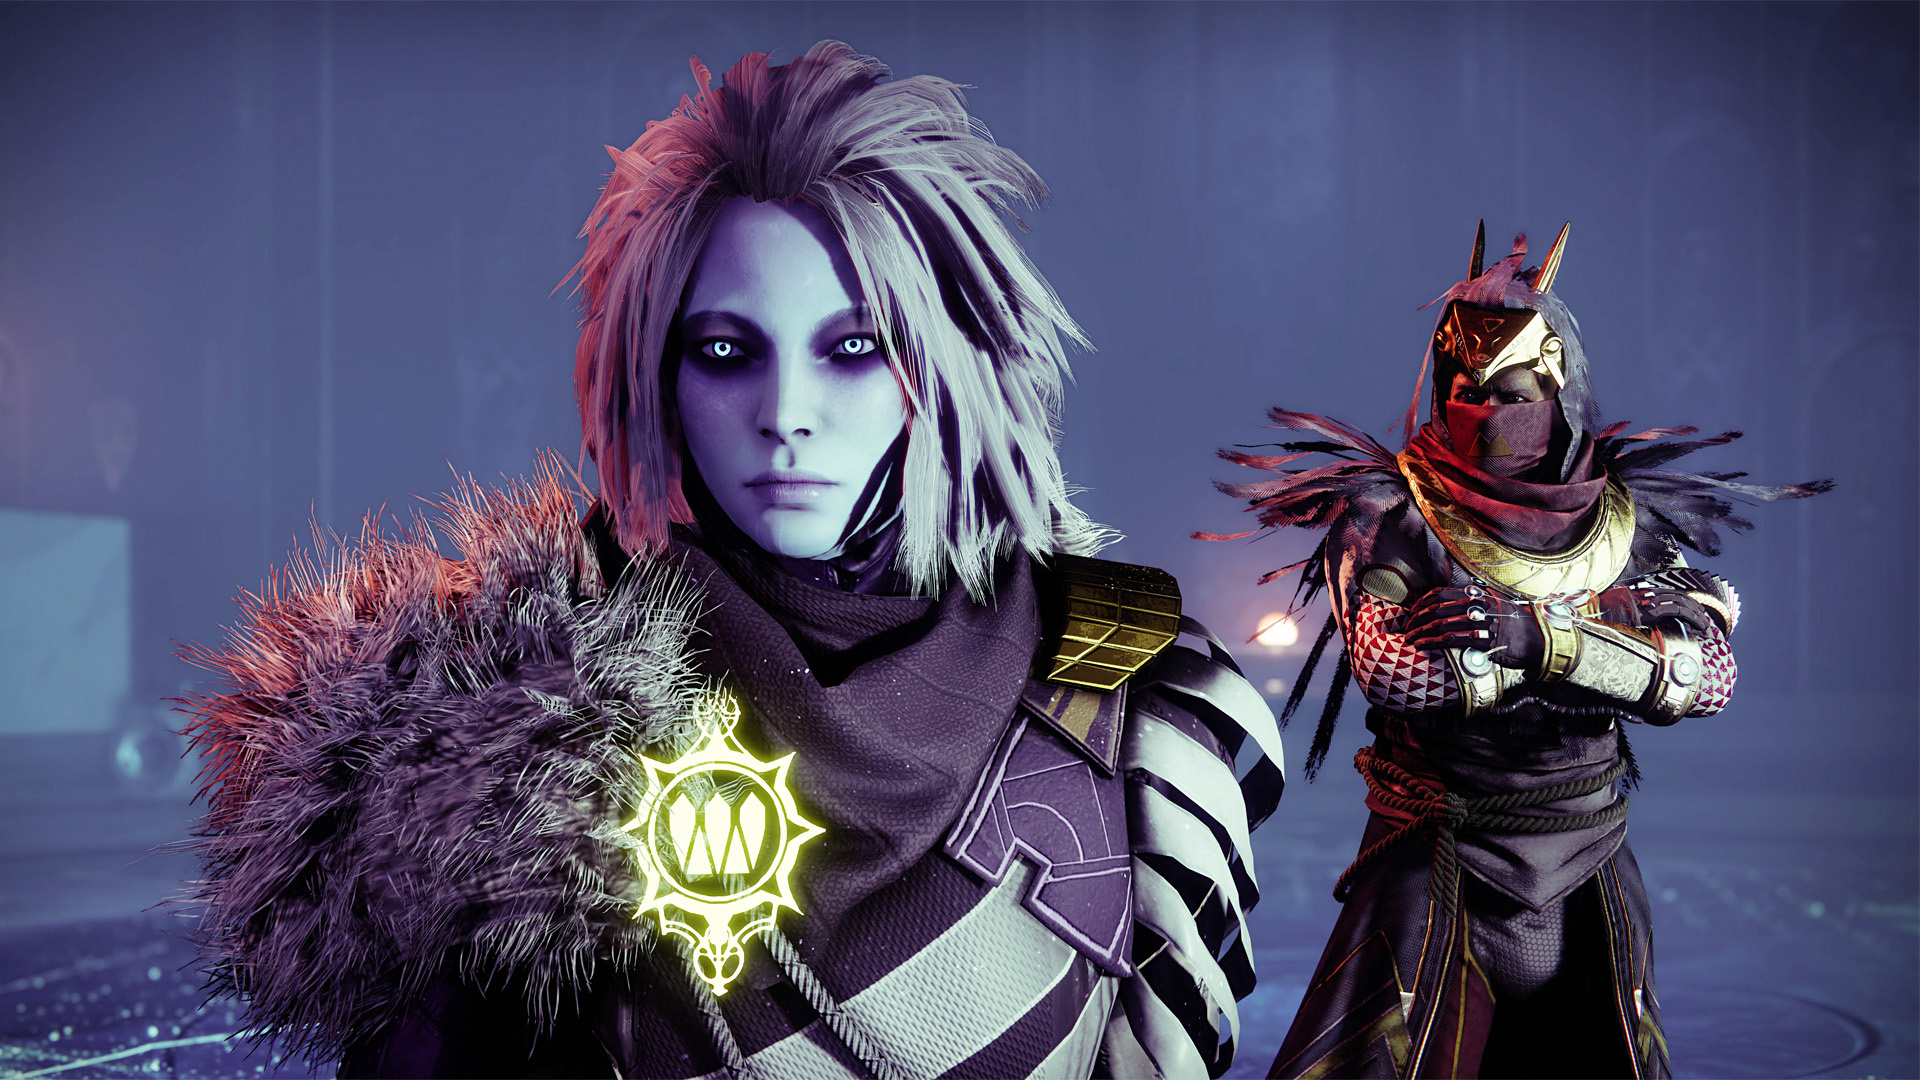 Destiny 2: The Witch Queen: Mara Sov, The queen of the Awoken in The Reef, Returned in Season of the Lost. 1920x1080 Full HD Background.